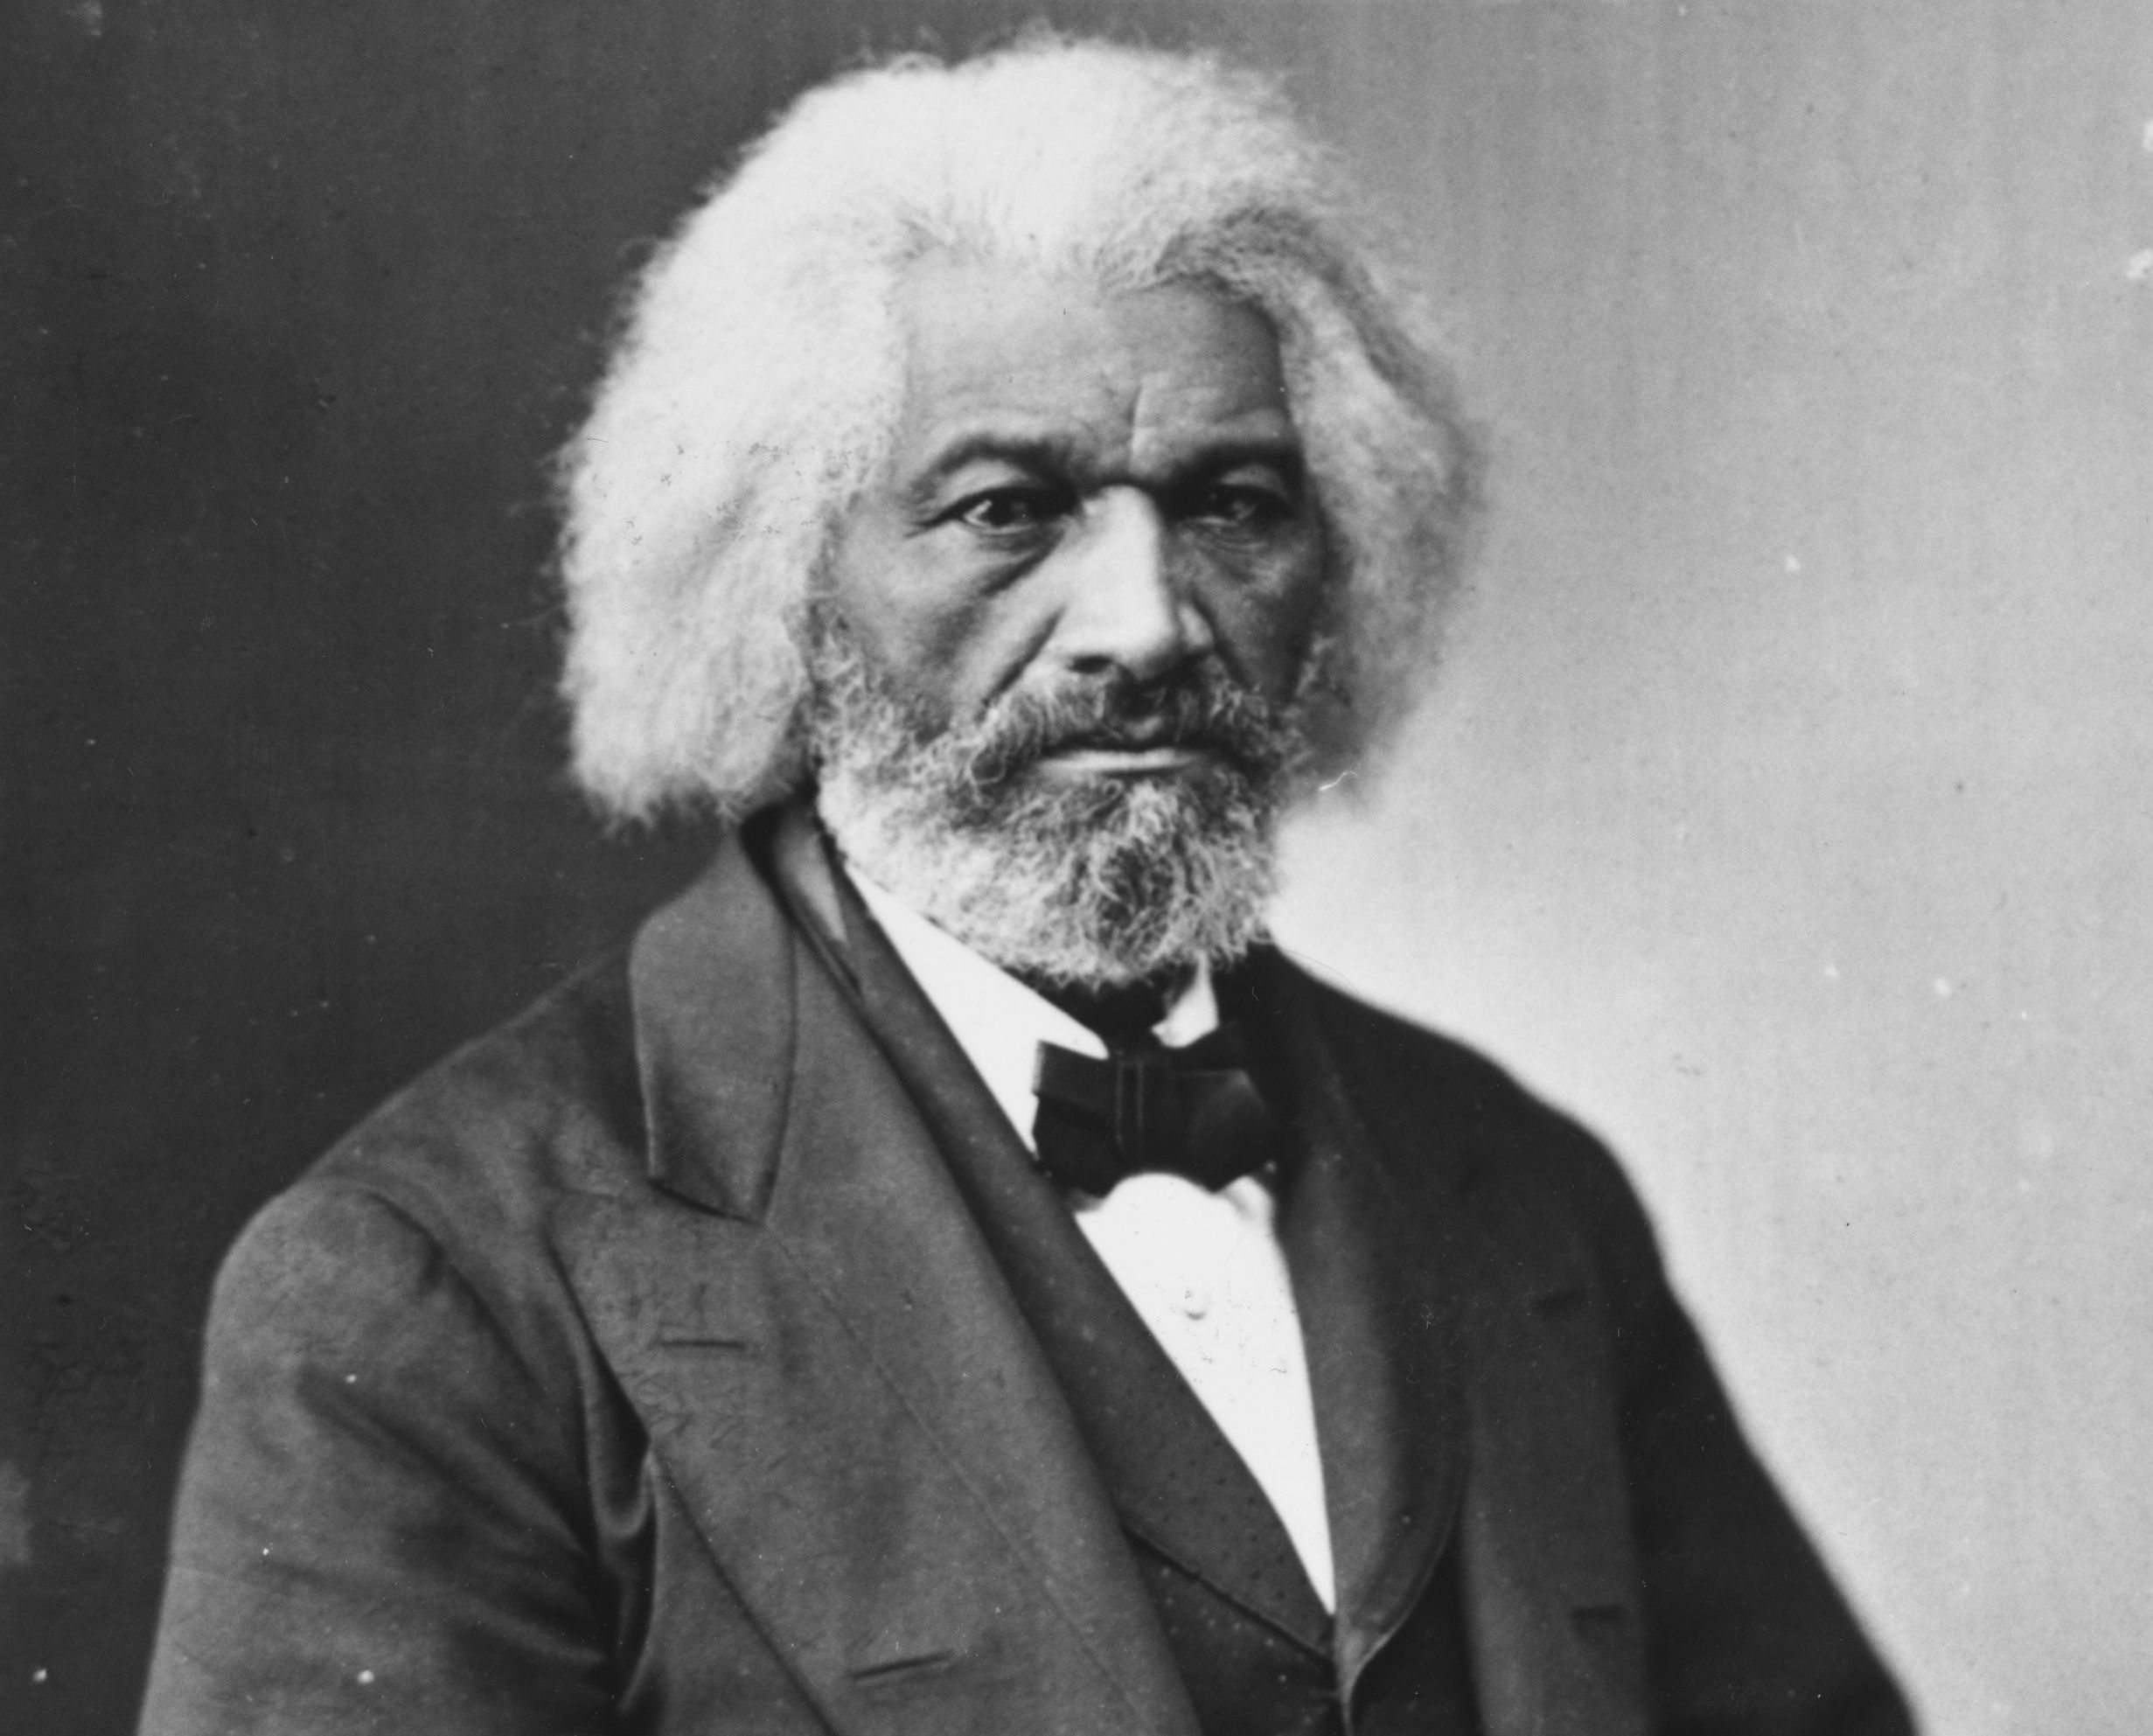 Frederick Douglass - Biography, Leader in the Abolitionist Movement